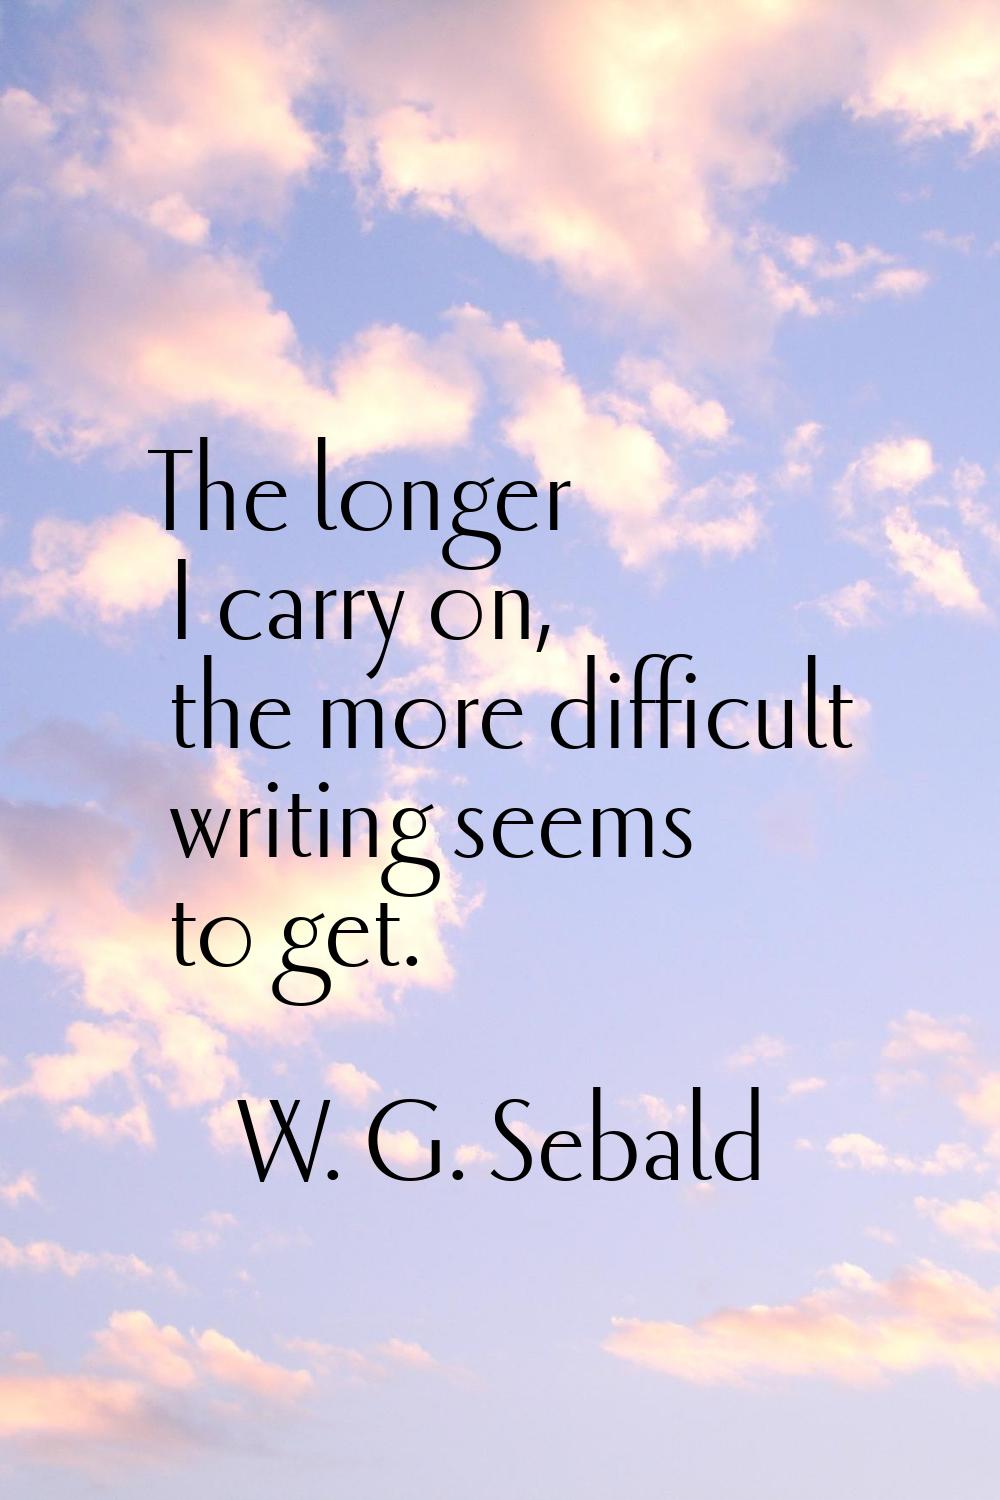 The longer I carry on, the more difficult writing seems to get.